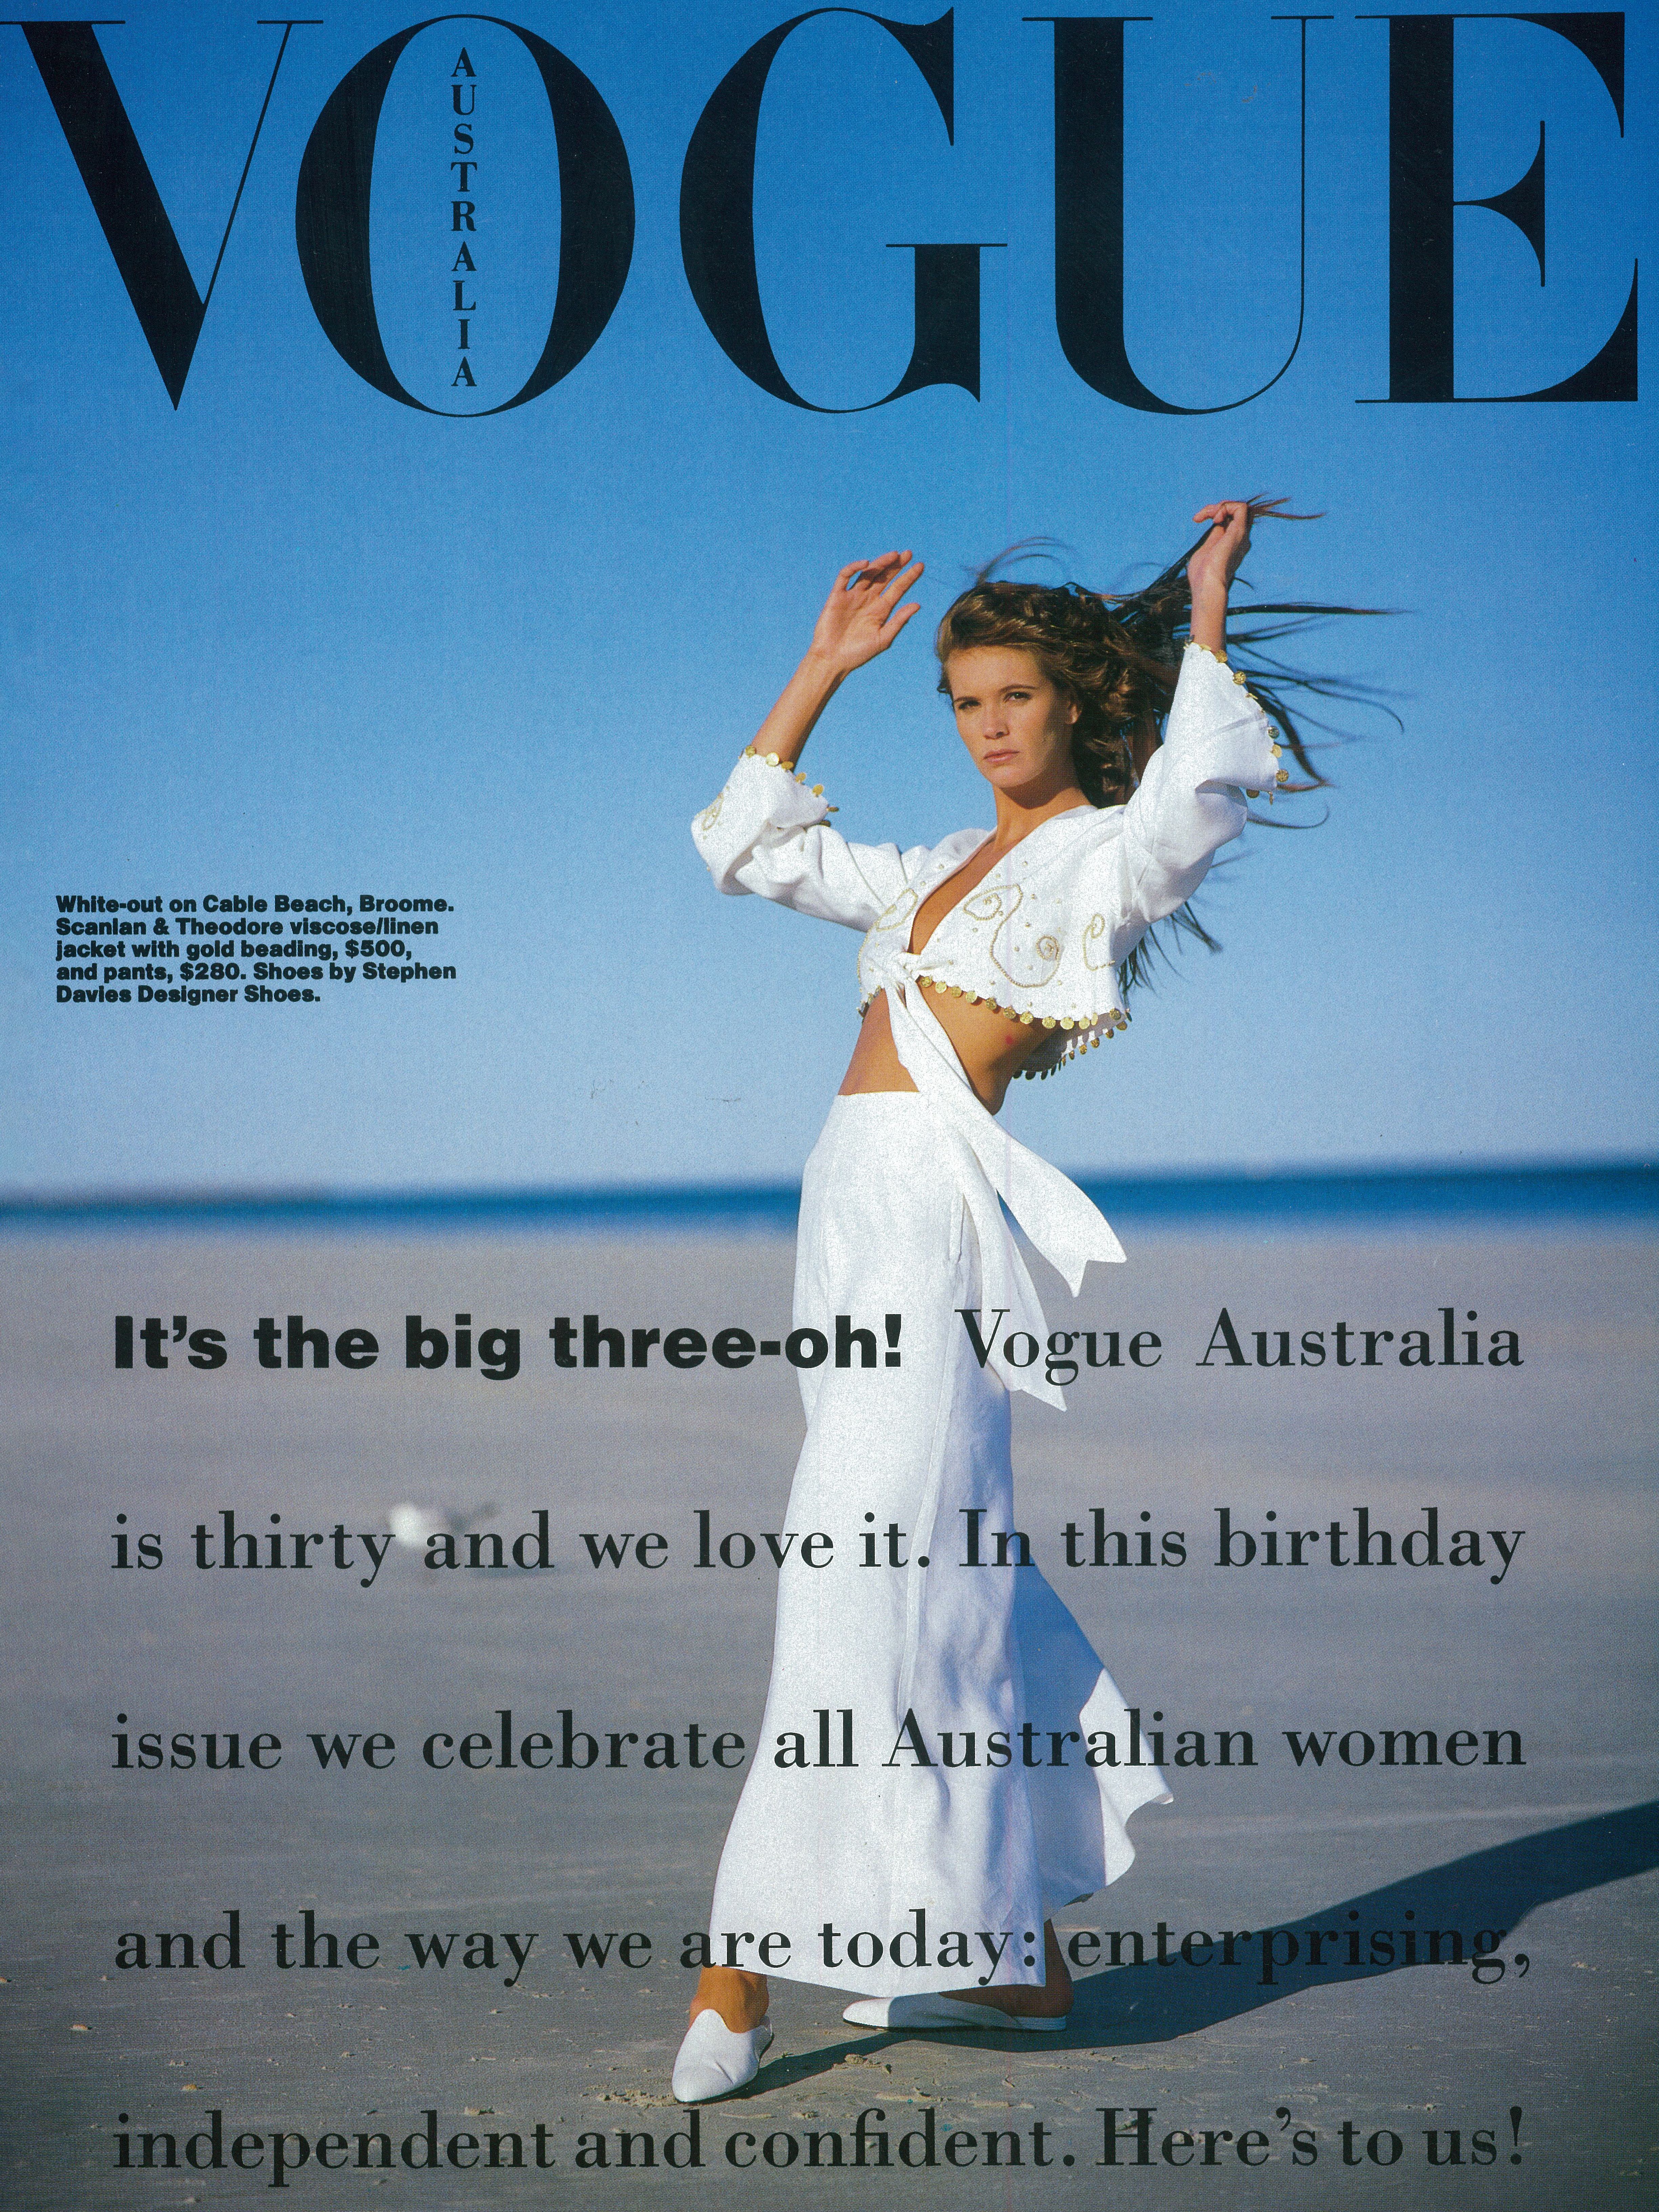 Vogue Australia magazine cover with Elle Macpherson on the beach wearing a white long-sleeve cropped top and white maxi skirt